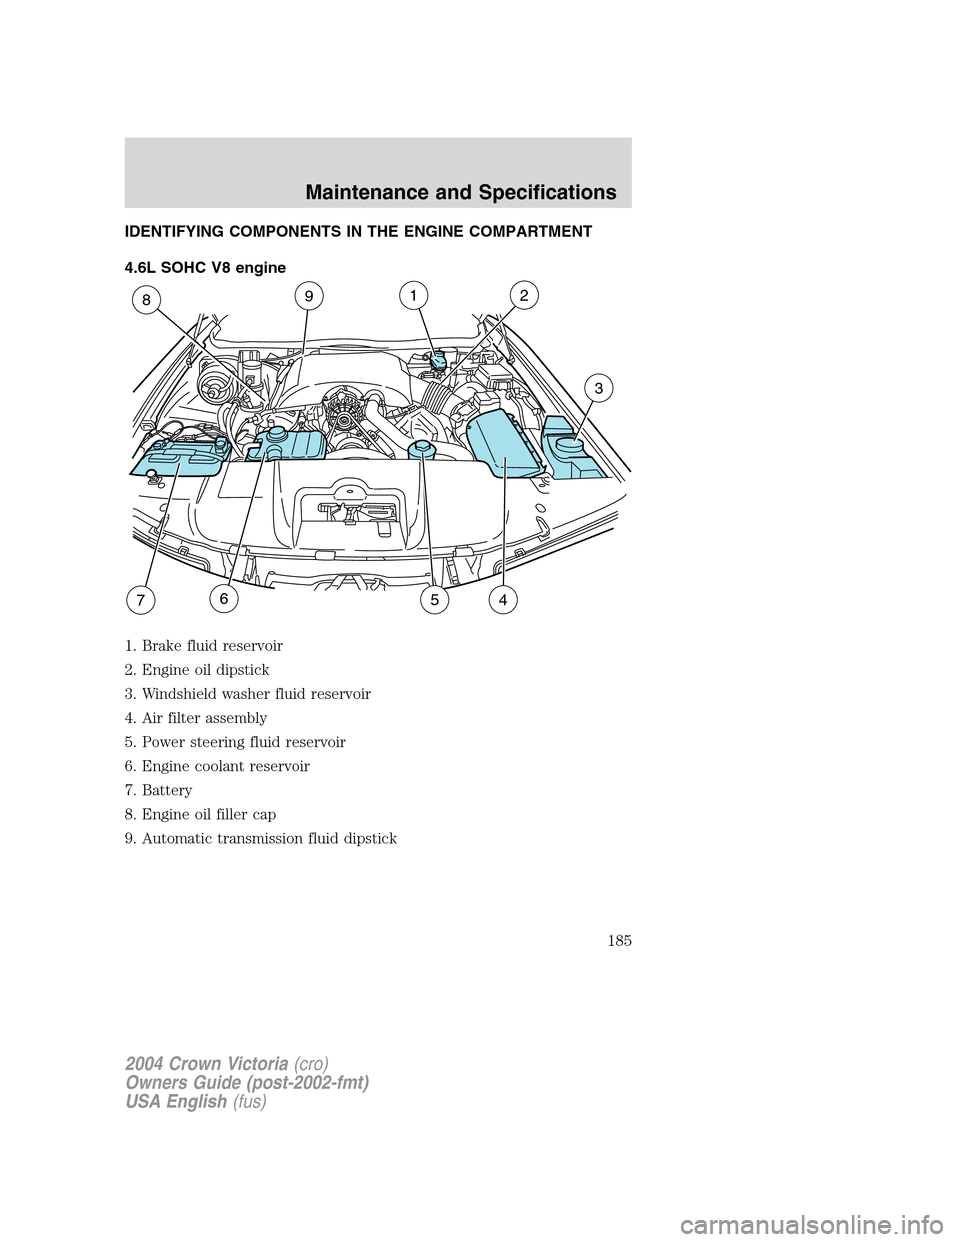 FORD CROWN VICTORIA 2004 2.G Owners Manual IDENTIFYING COMPONENTS IN THE ENGINE COMPARTMENT
4.6L SOHC V8 engine
1. Brake fluid reservoir
2. Engine oil dipstick
3. Windshield washer fluid reservoir
4. Air filter assembly
5. Power steering fluid